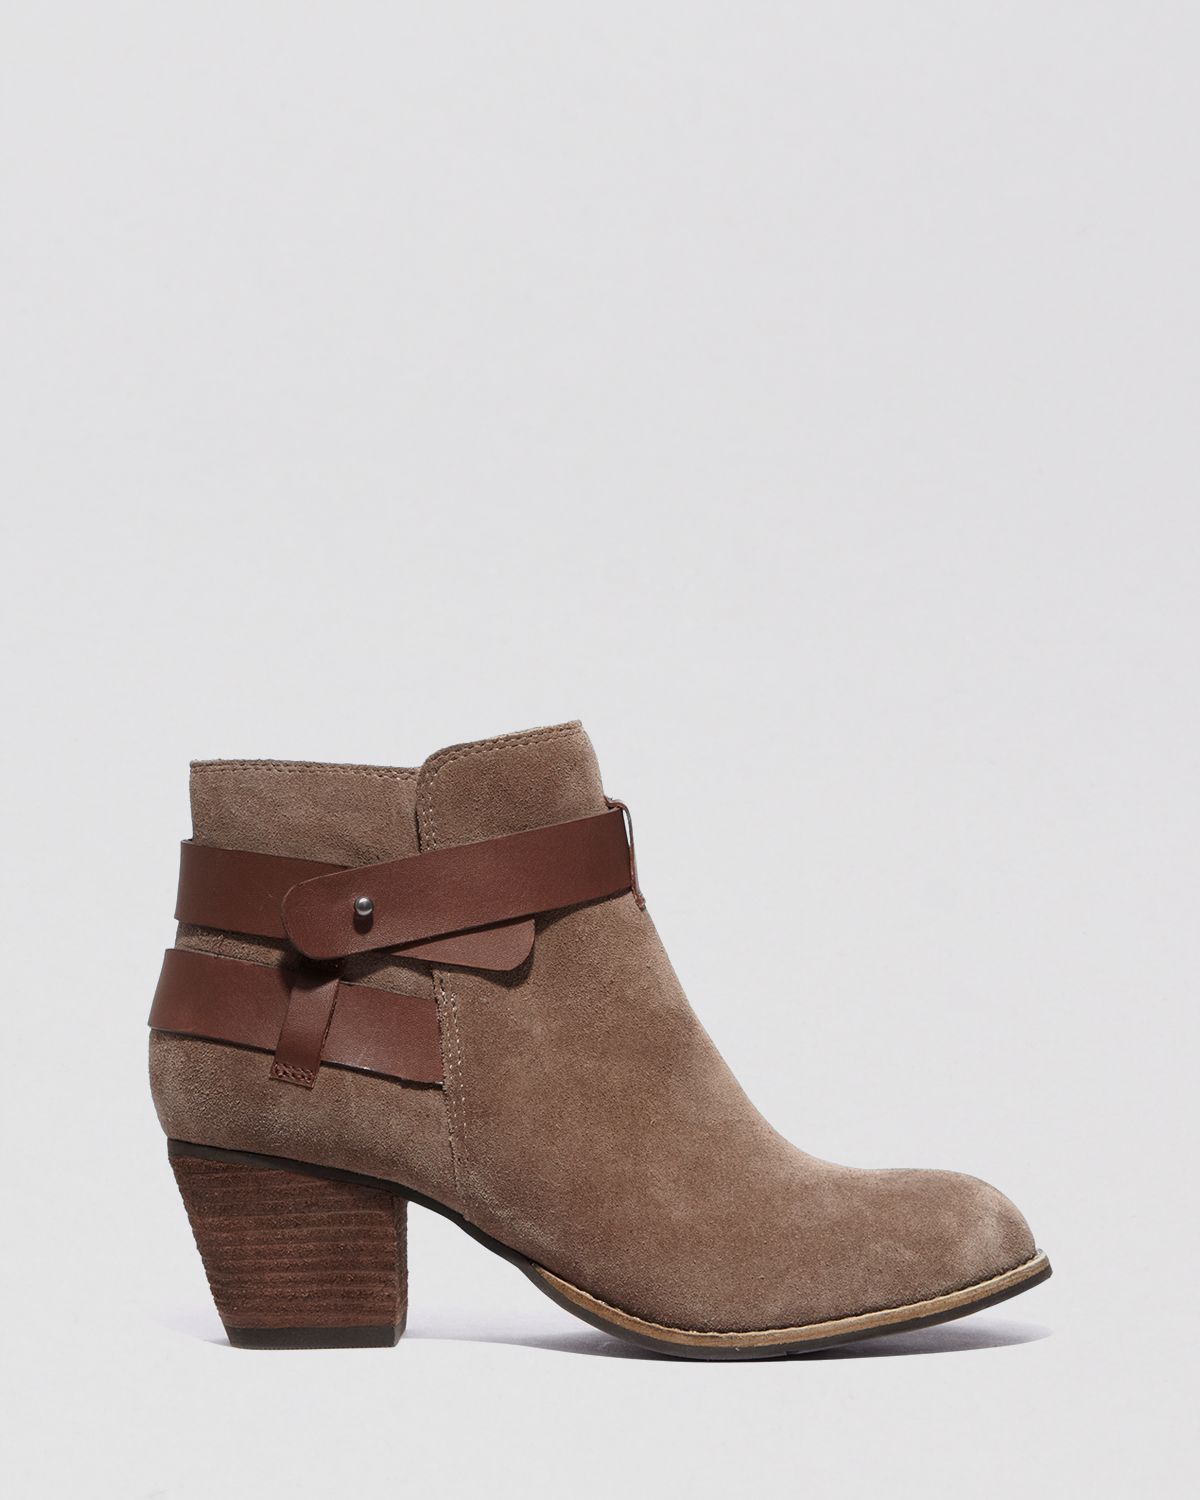 Dolce vita Keiton Heeled Ankle Boots - Grey Suede in Brown 